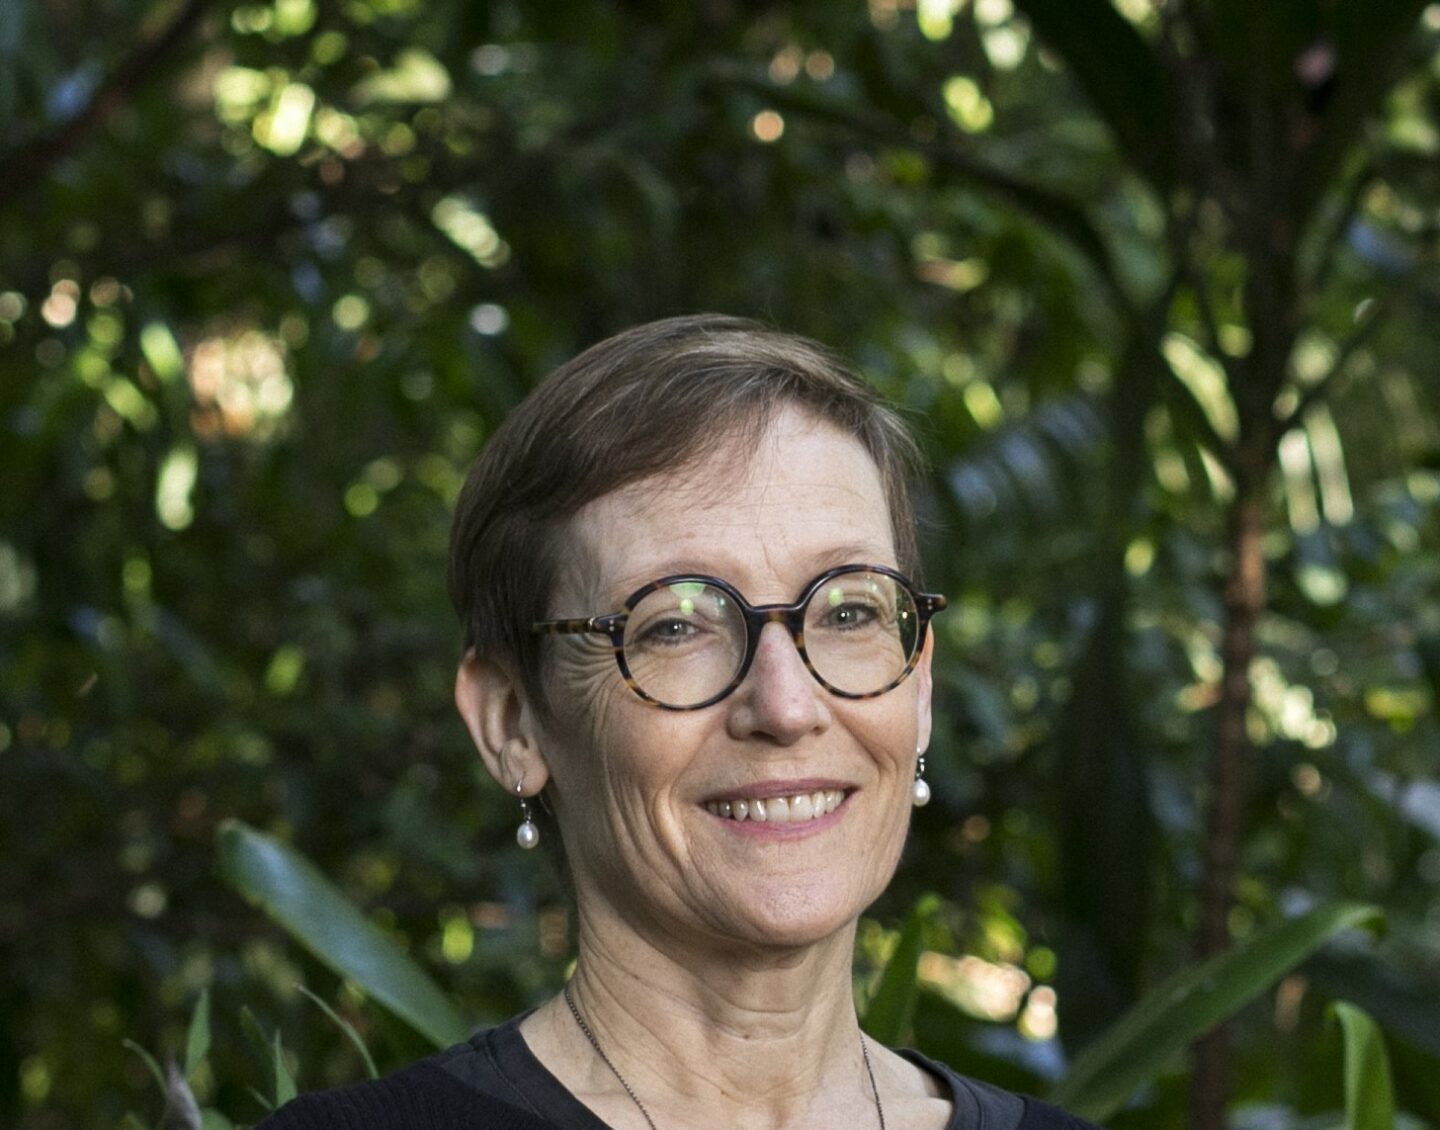 A middle-aged woman with short brown hair and brown, round glasses smiles in front of a tree